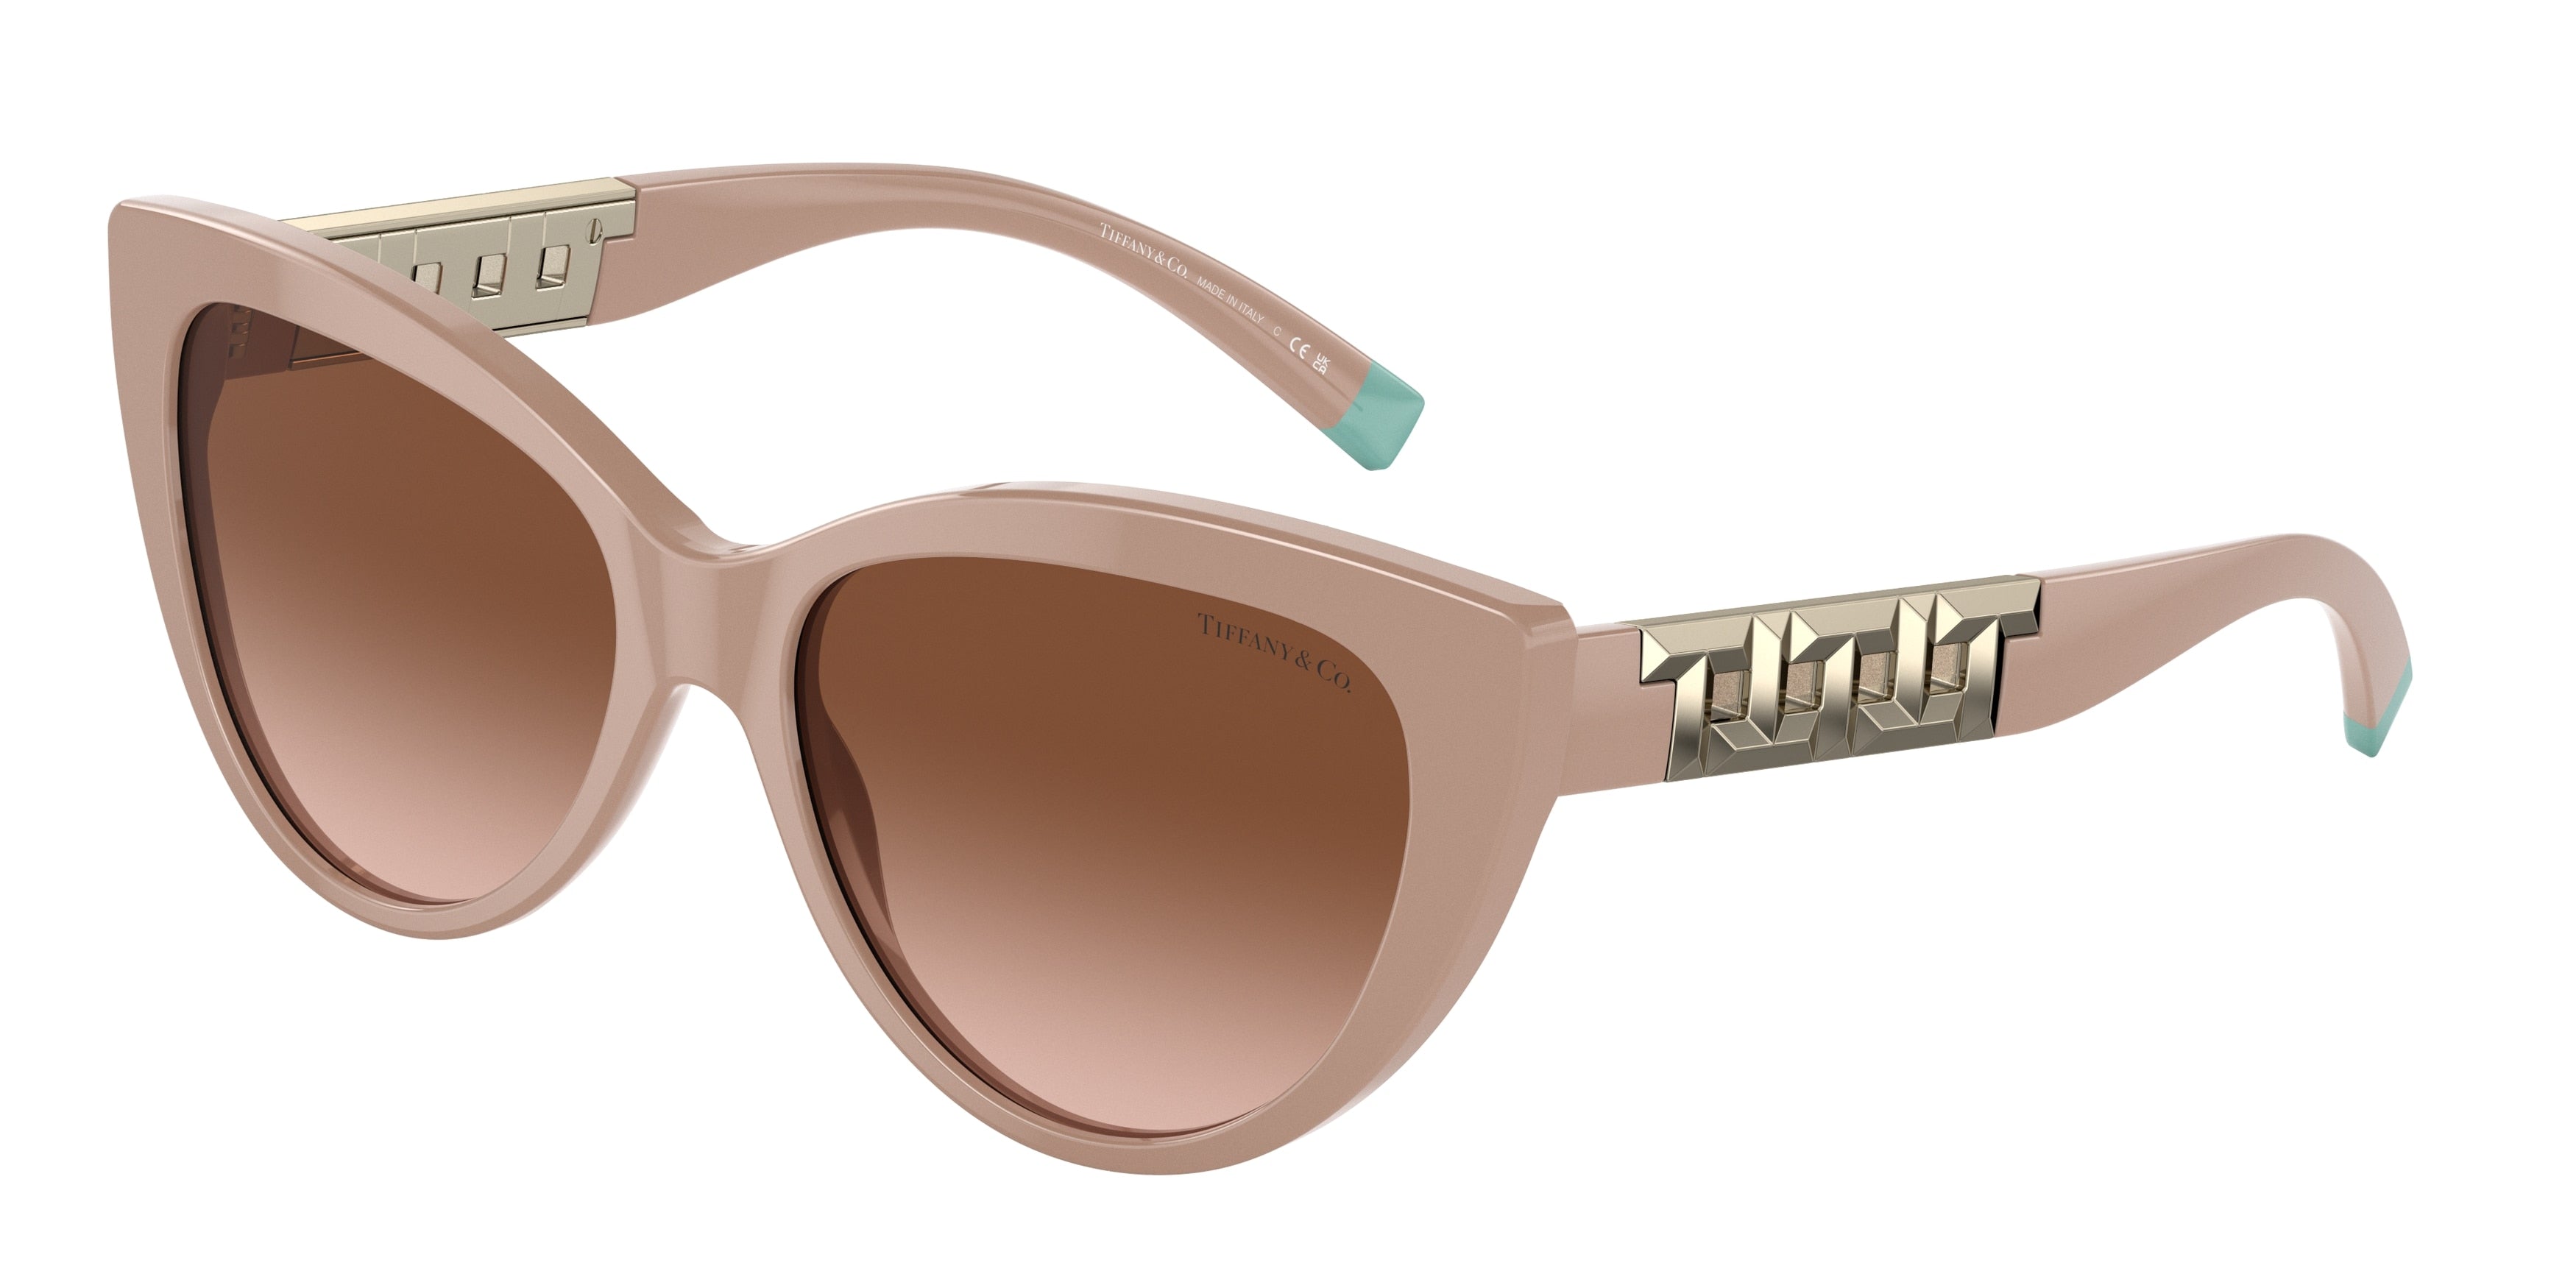 Tiffany TF4196 Cat Eye Sunglasses  83523B-Solid Nude 56-140-16 - Color Map Beige